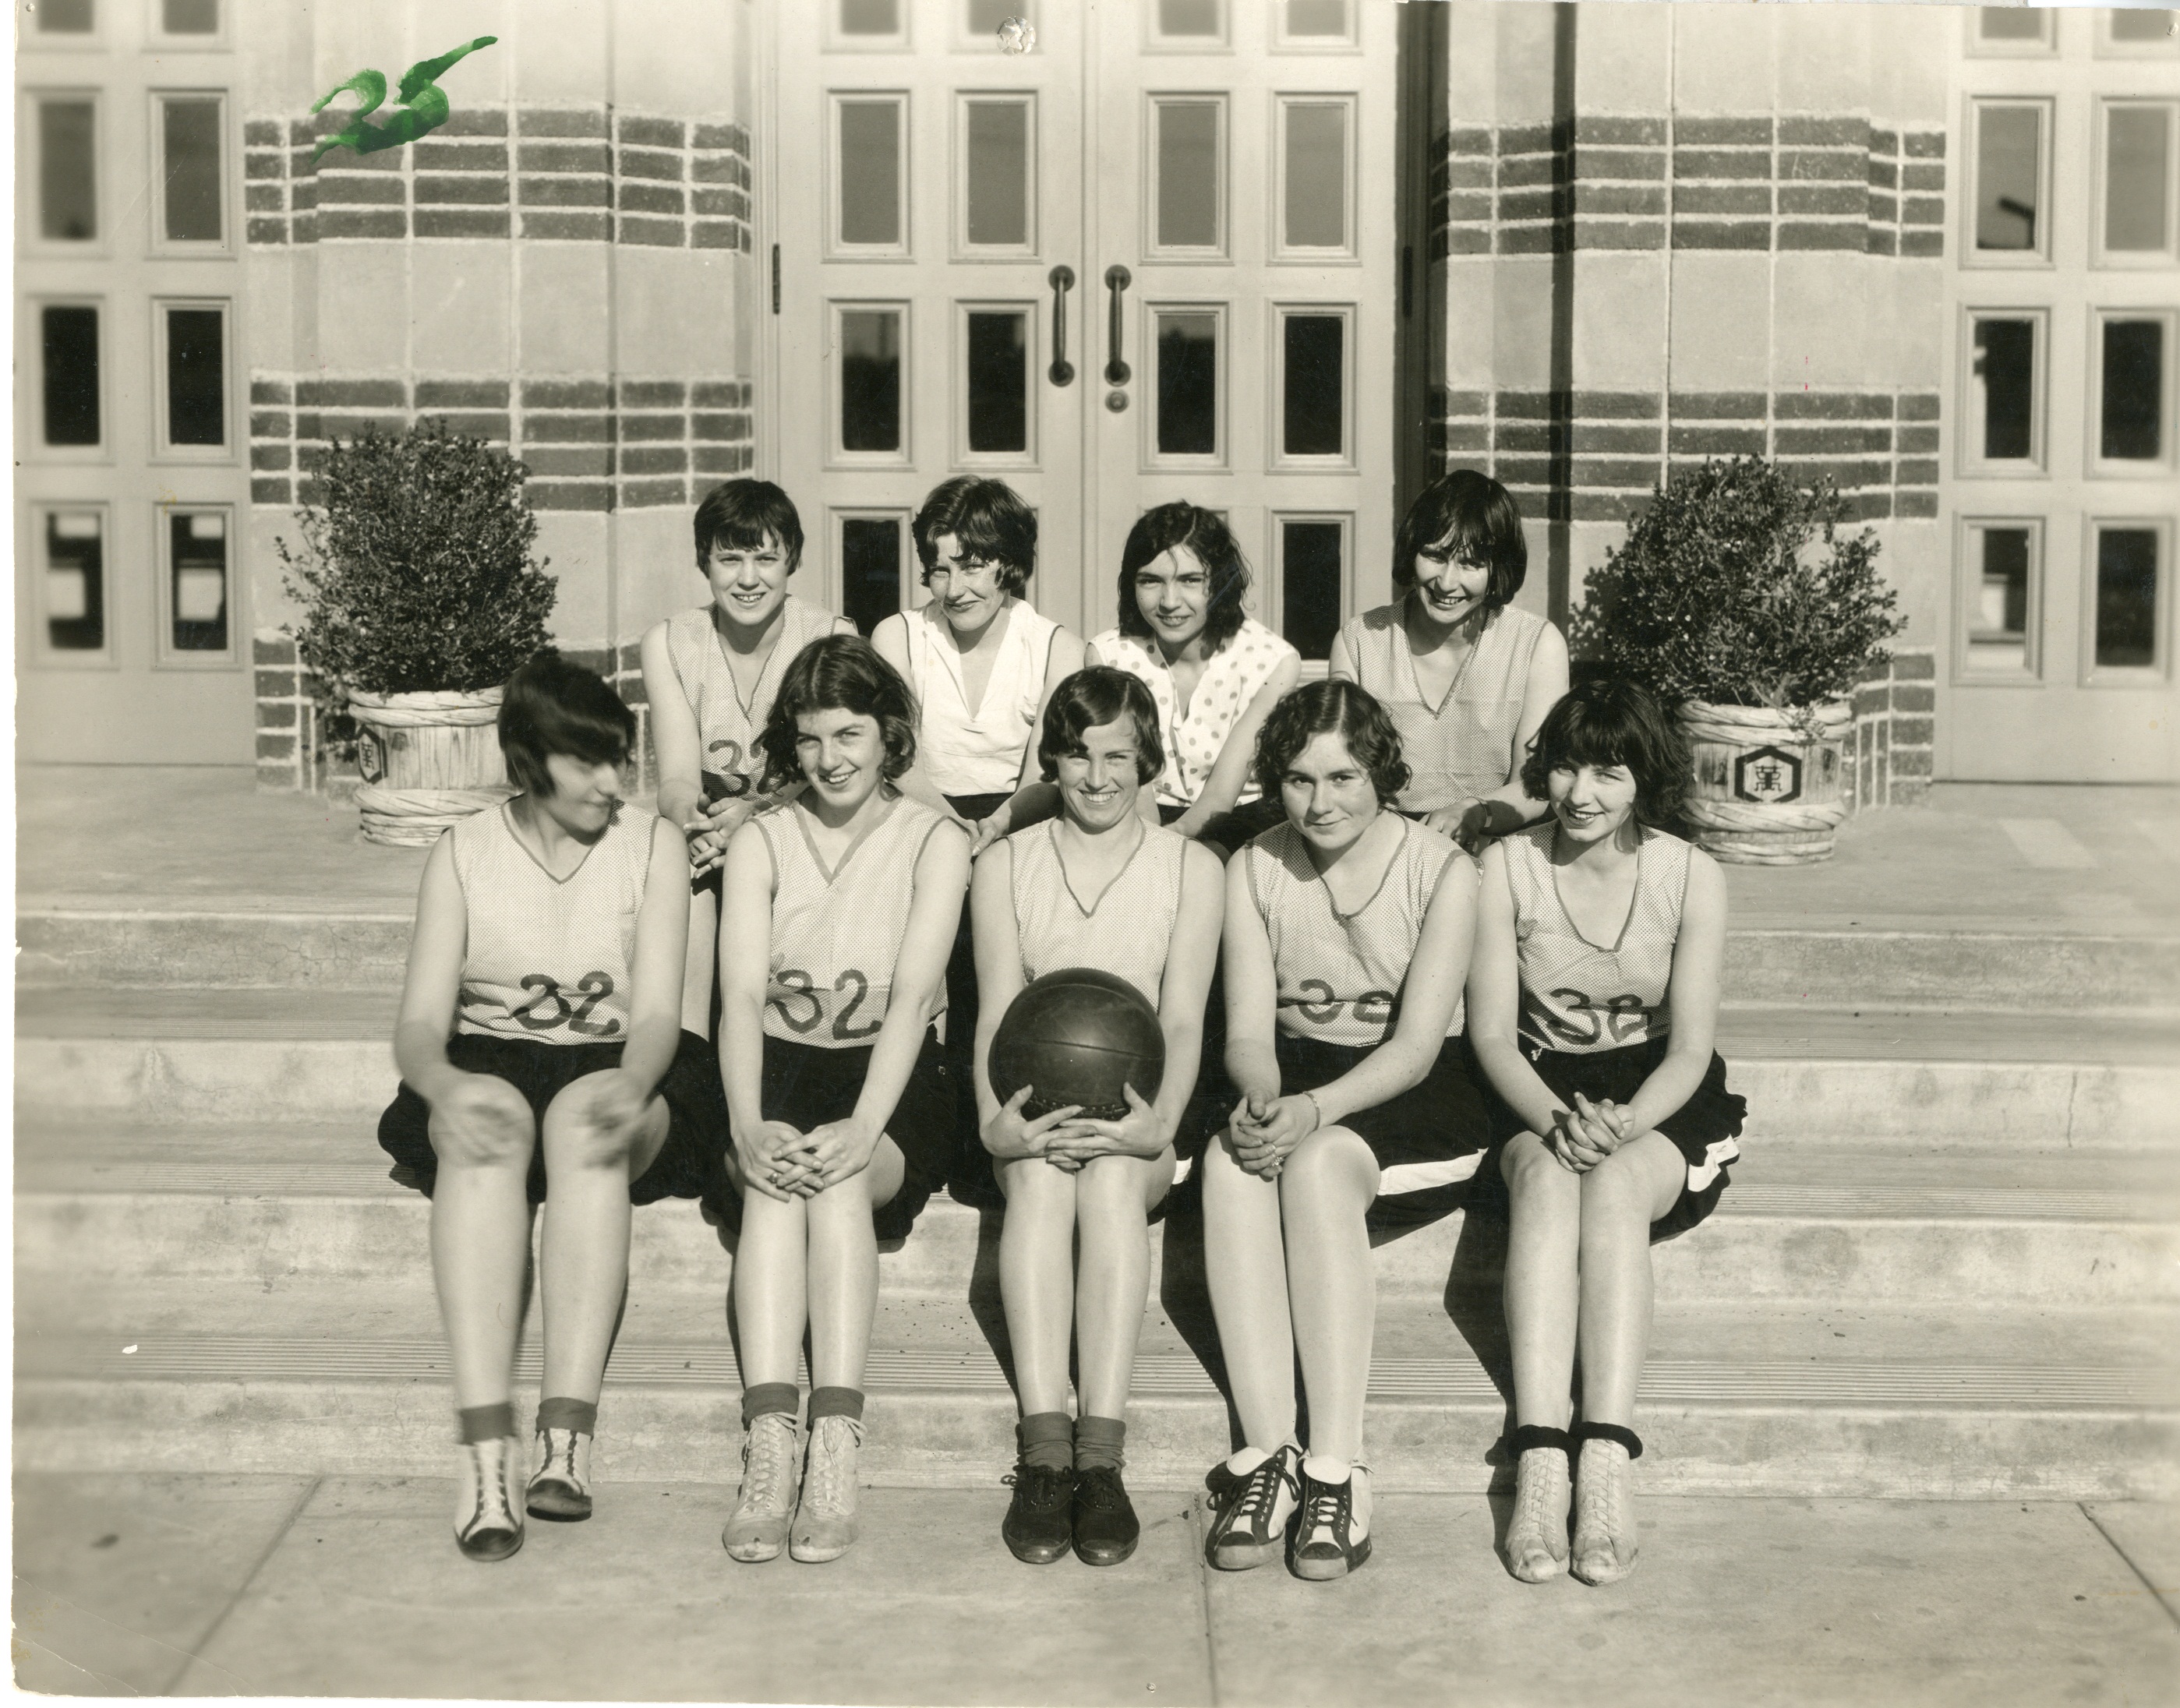 7. California Christian College (now known as Chapman University) women’s basketball team, Los Angeles, 1929. (University Archives)